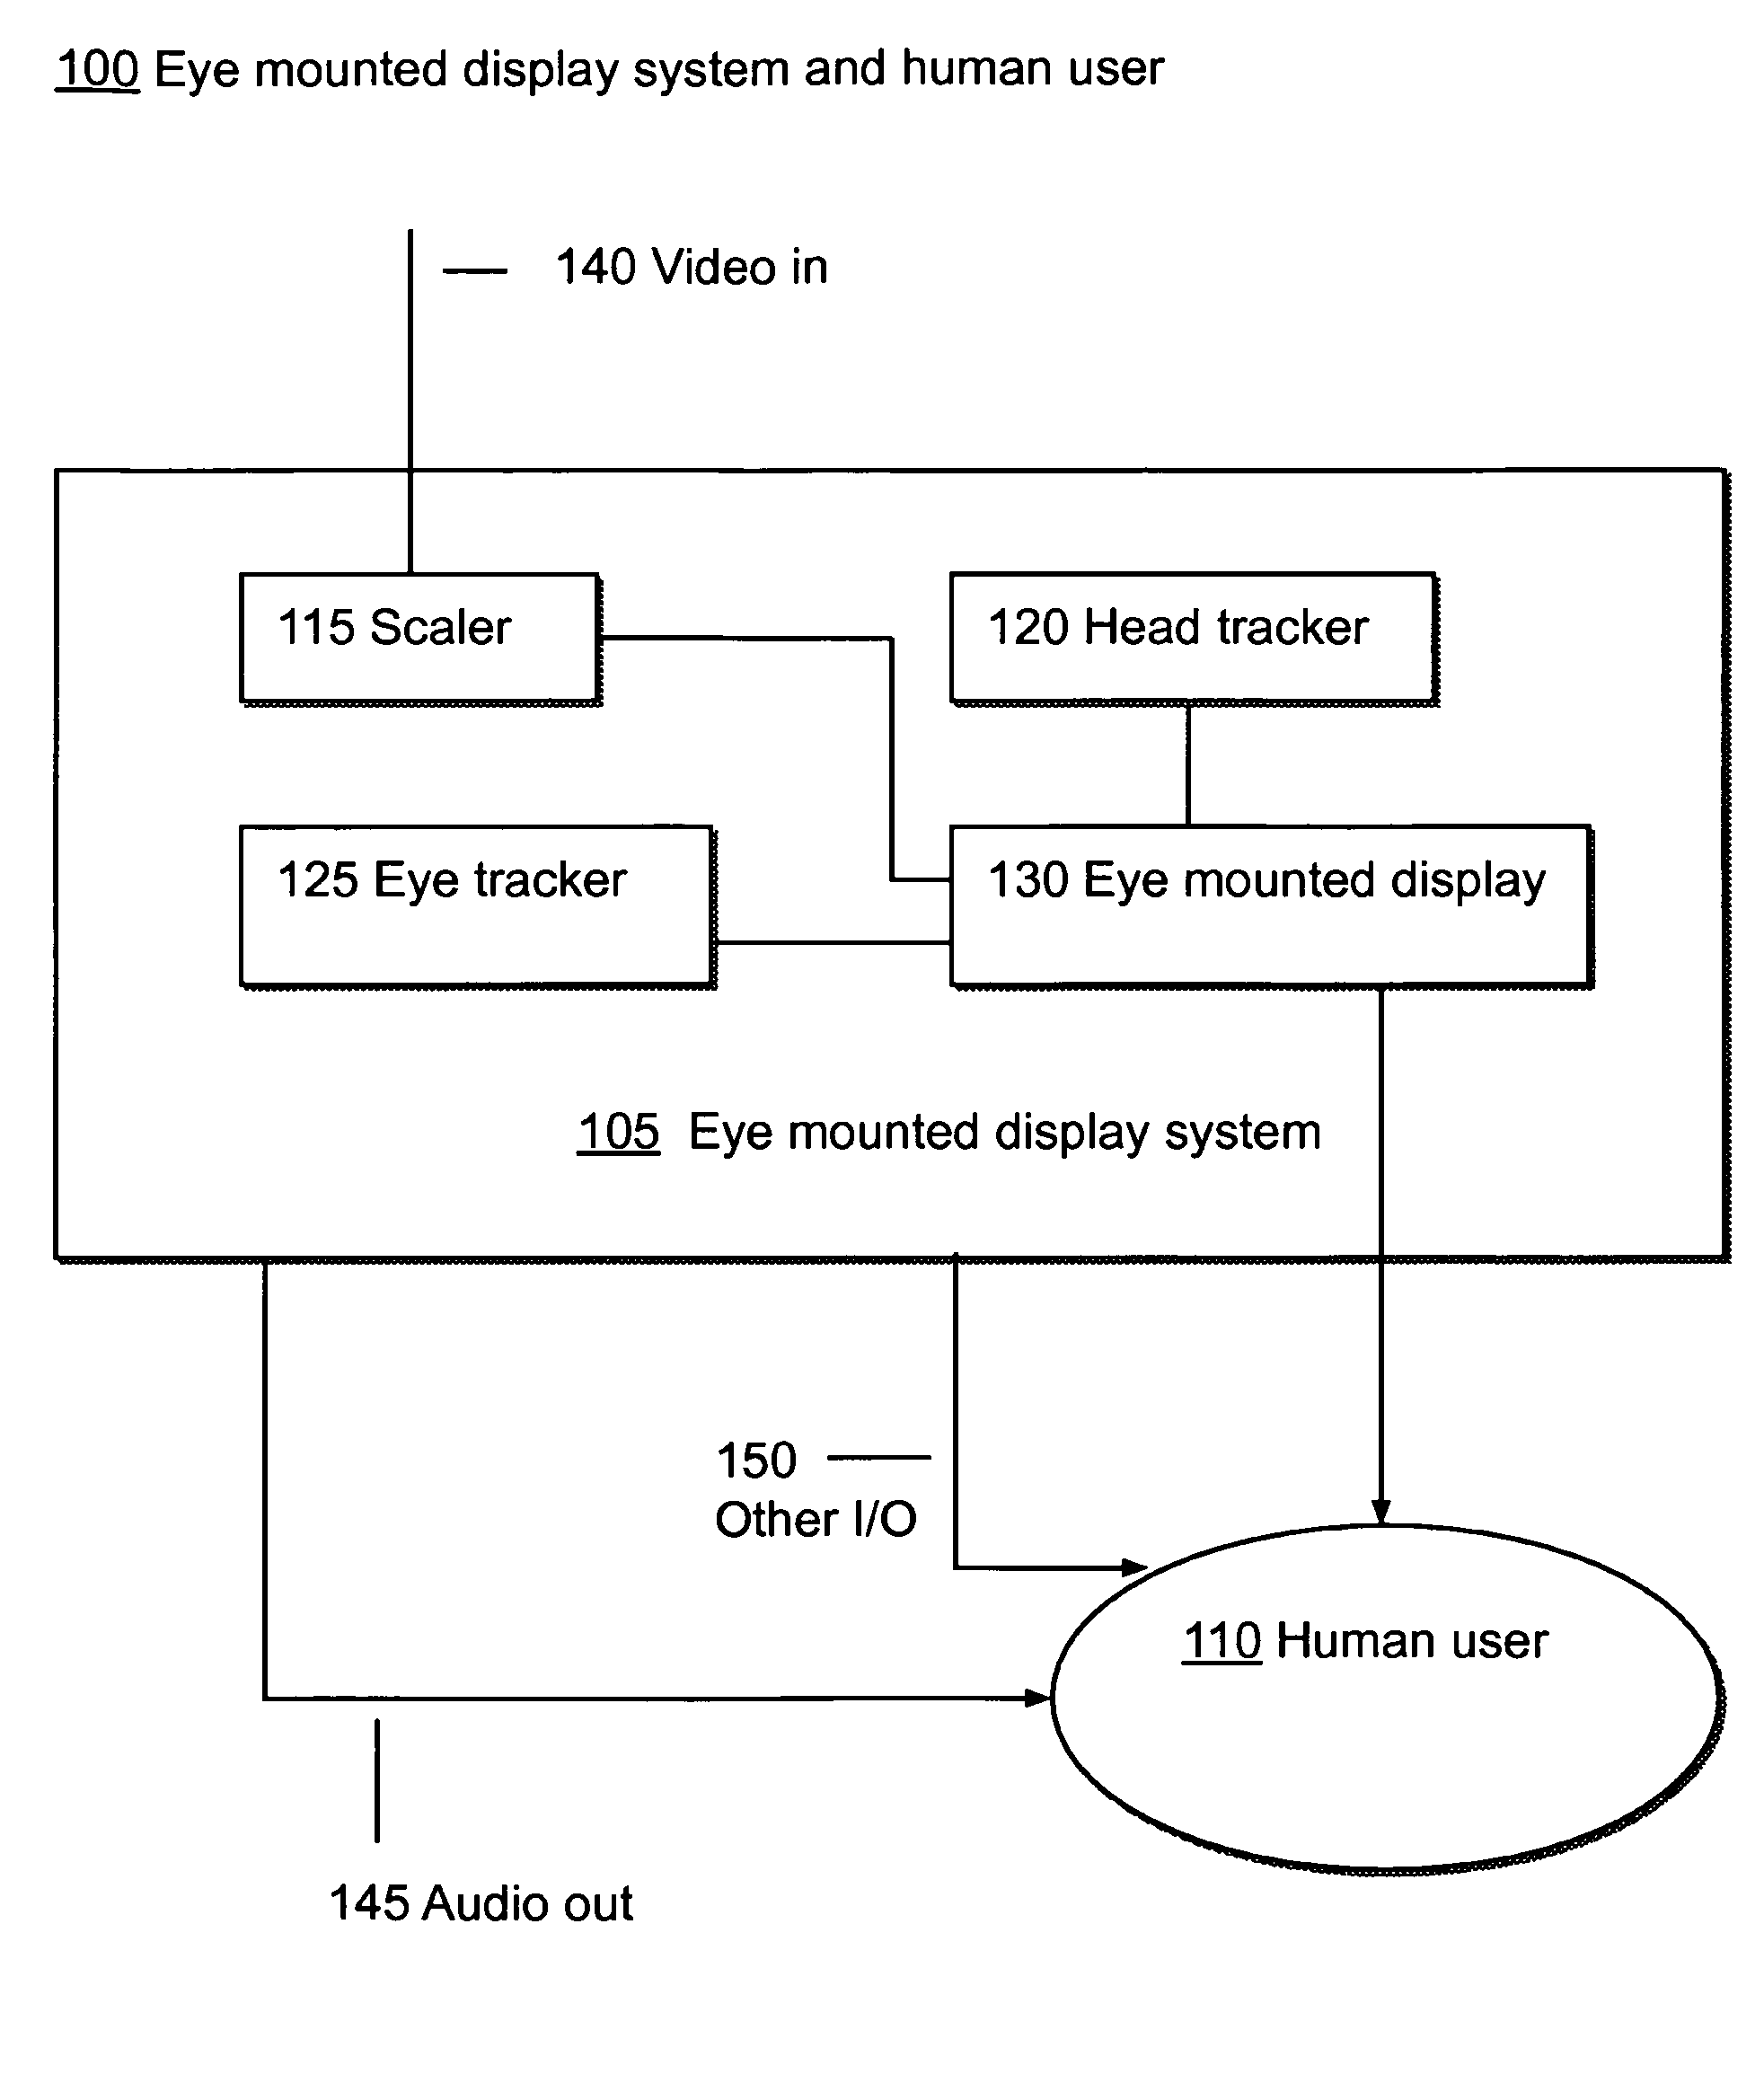 Systems using eye mounted displays